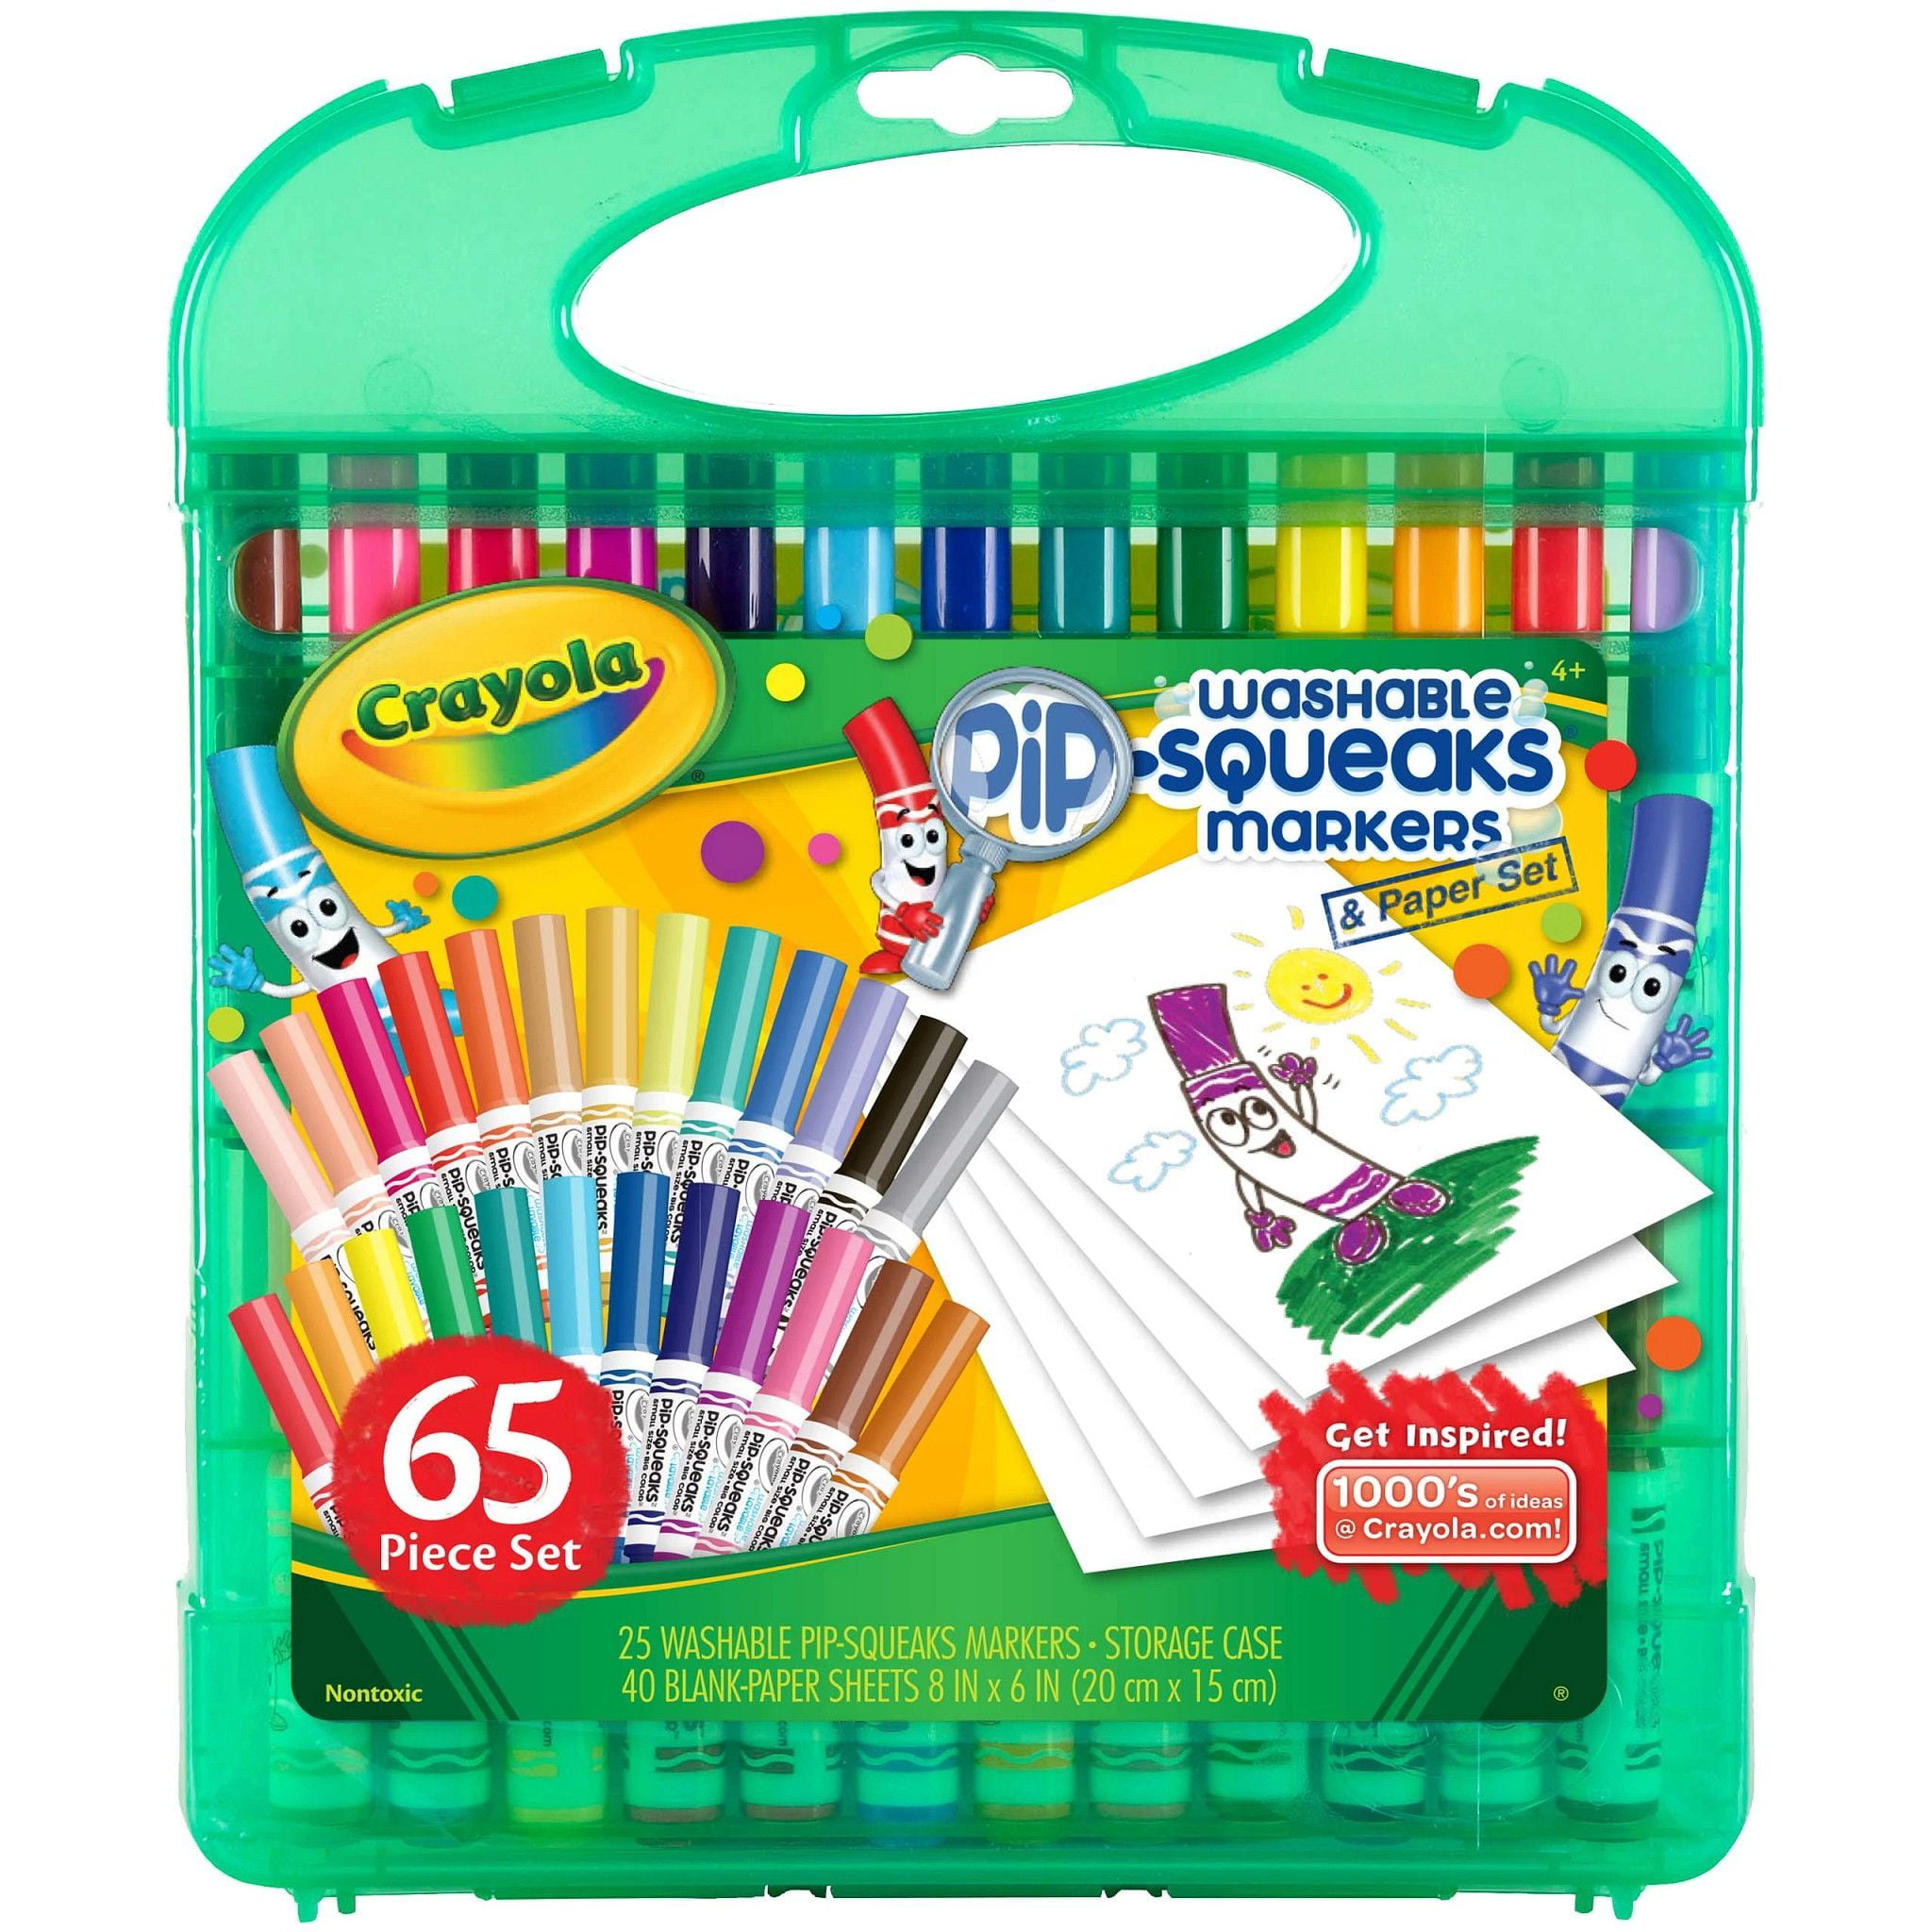 Crayola Colors of the World Broad Line Markers 24 Pack, Skin Tone Markers,  Stocking Stuffers, 24 Colors